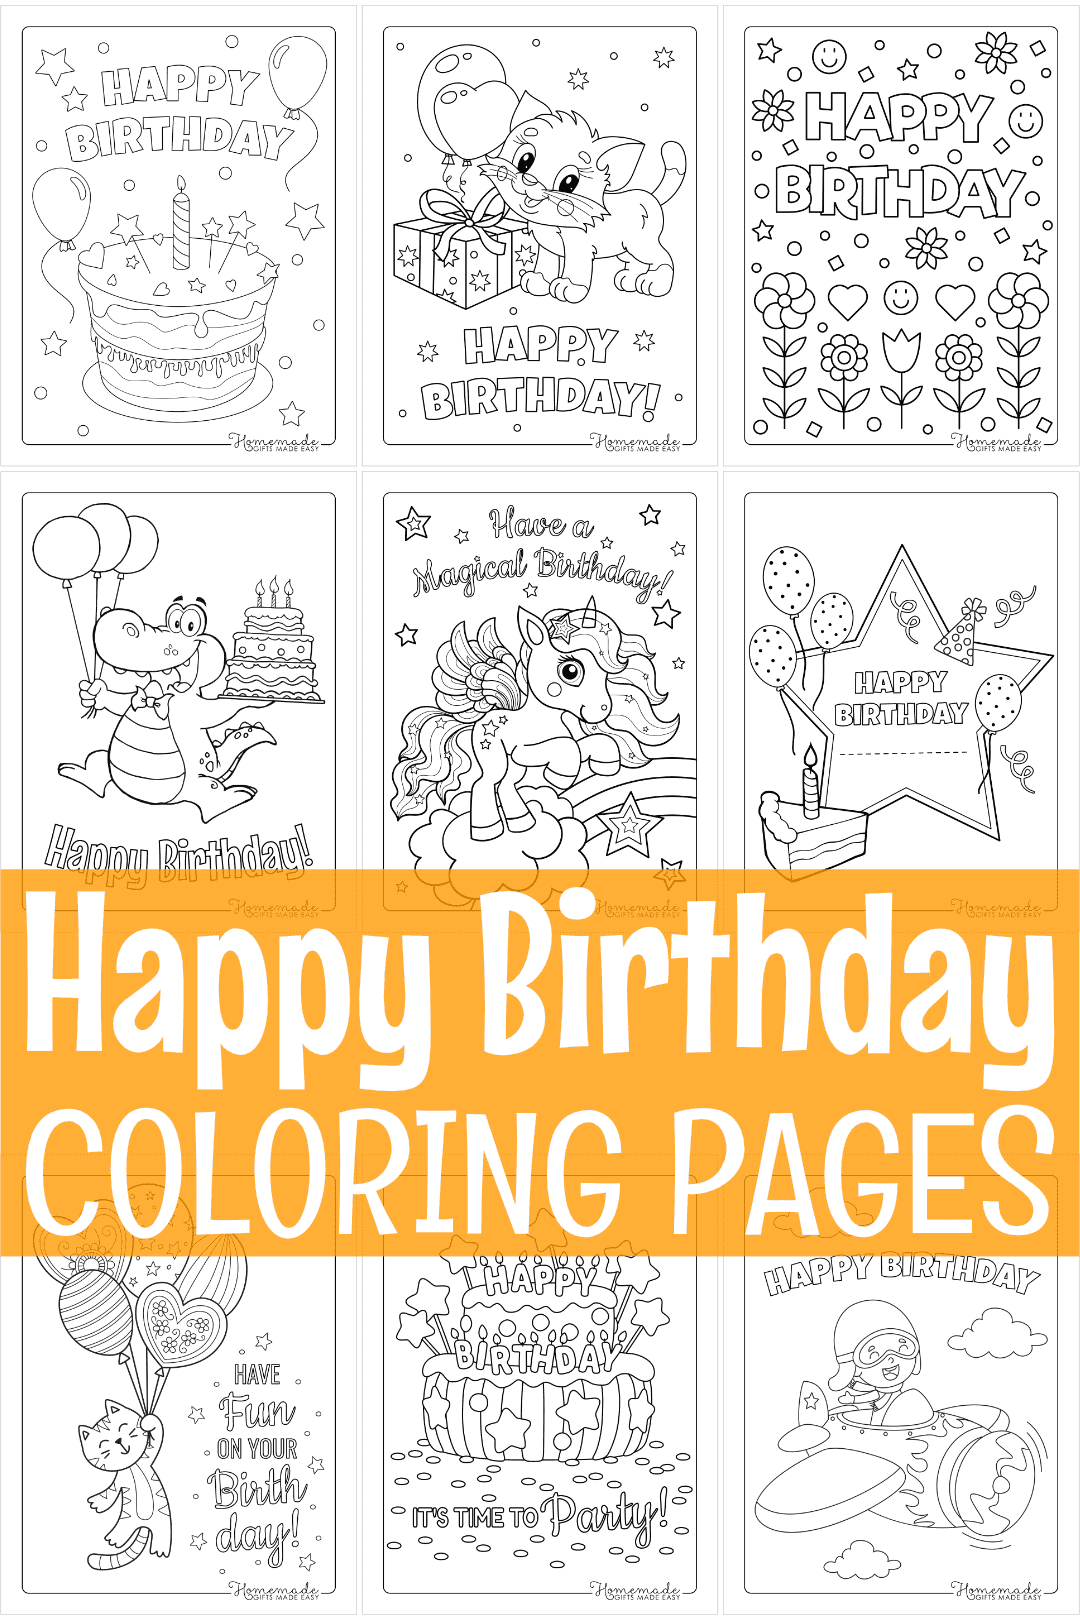 happy birthday coloring pages montage